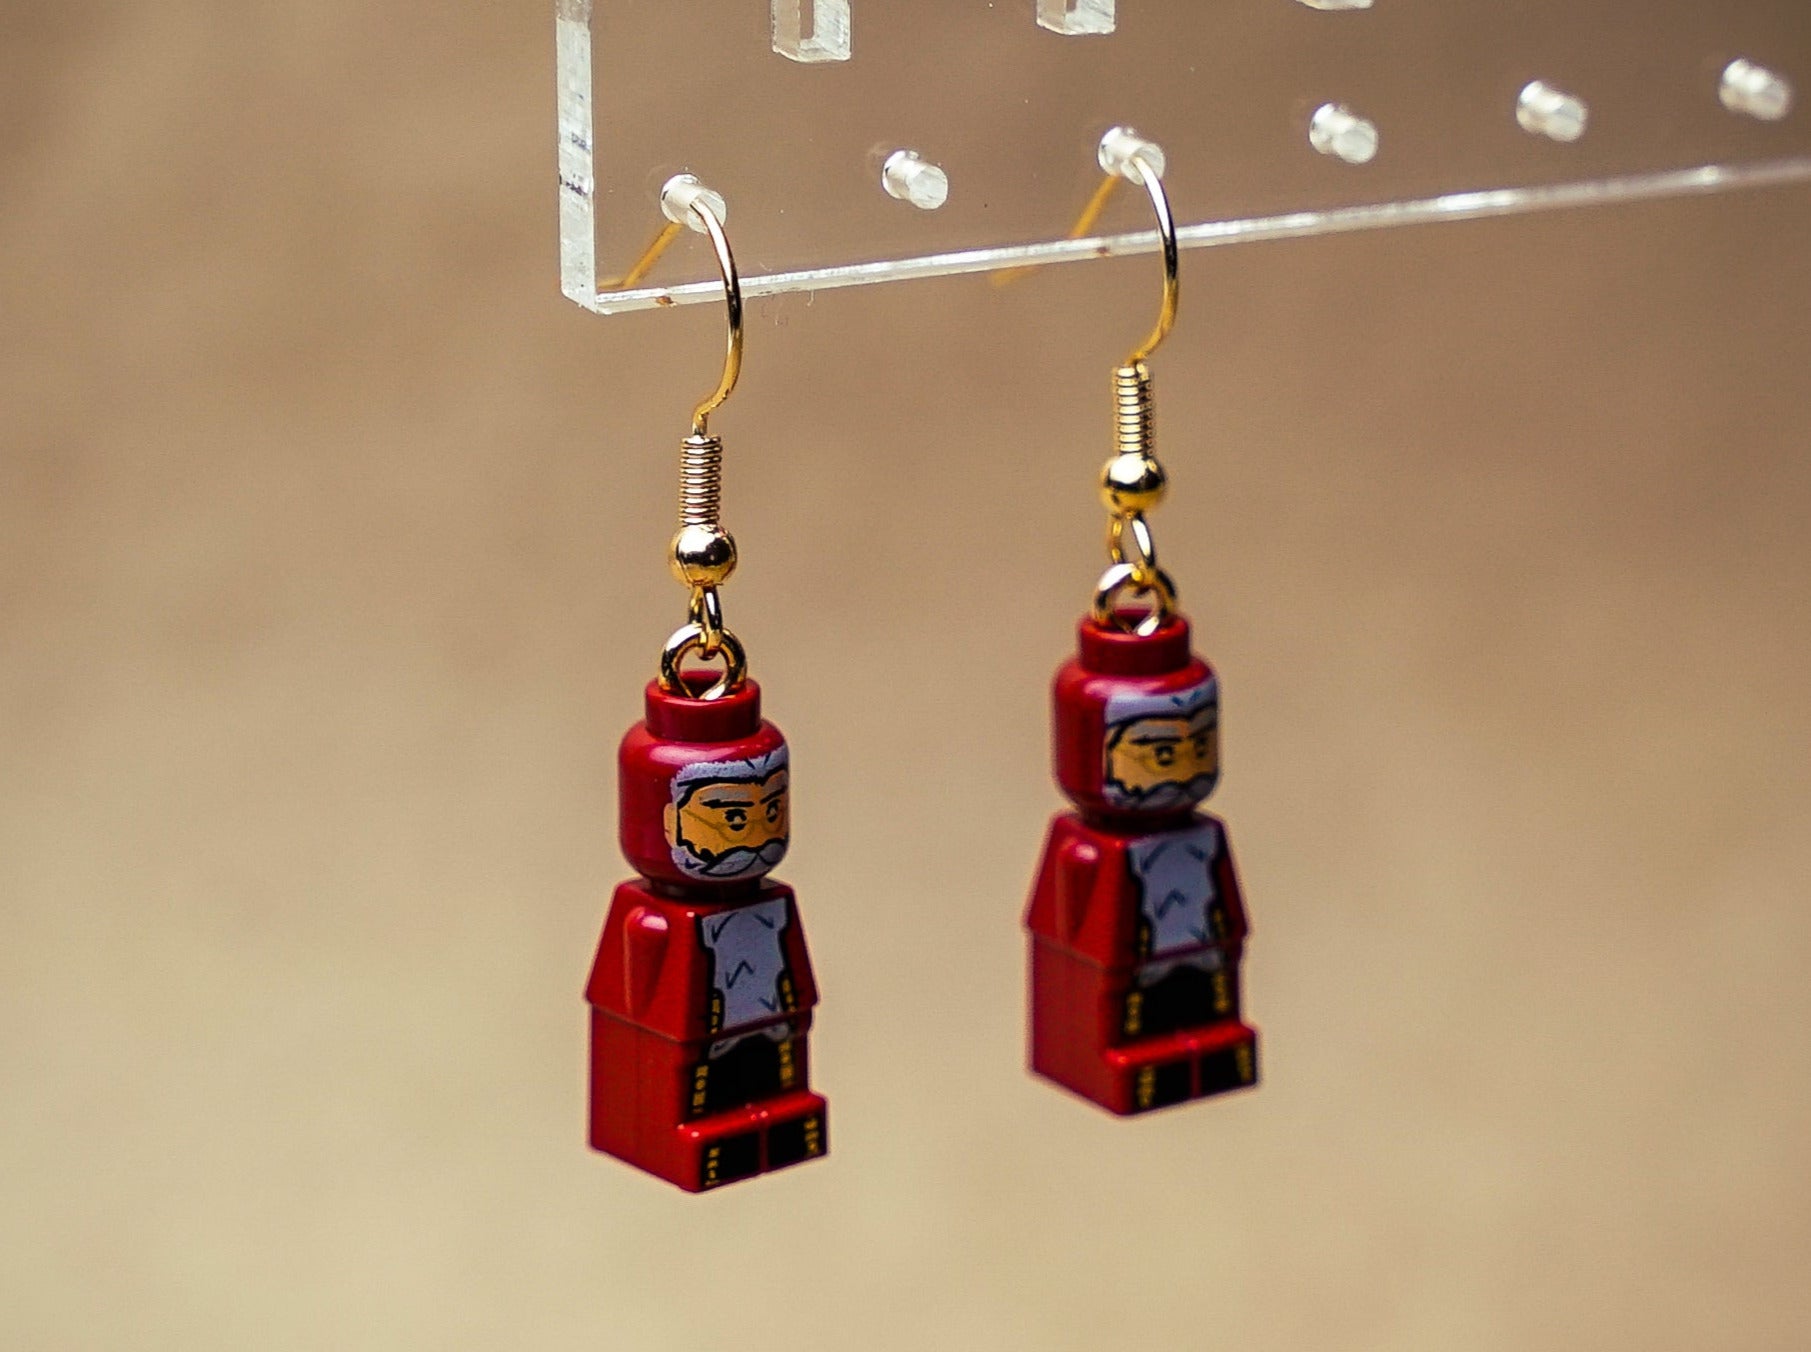 StudBee - Micro Dumbledore Wizard Earrings | Handcrafted with Authentic LEGO® Bricks | Harry Potter